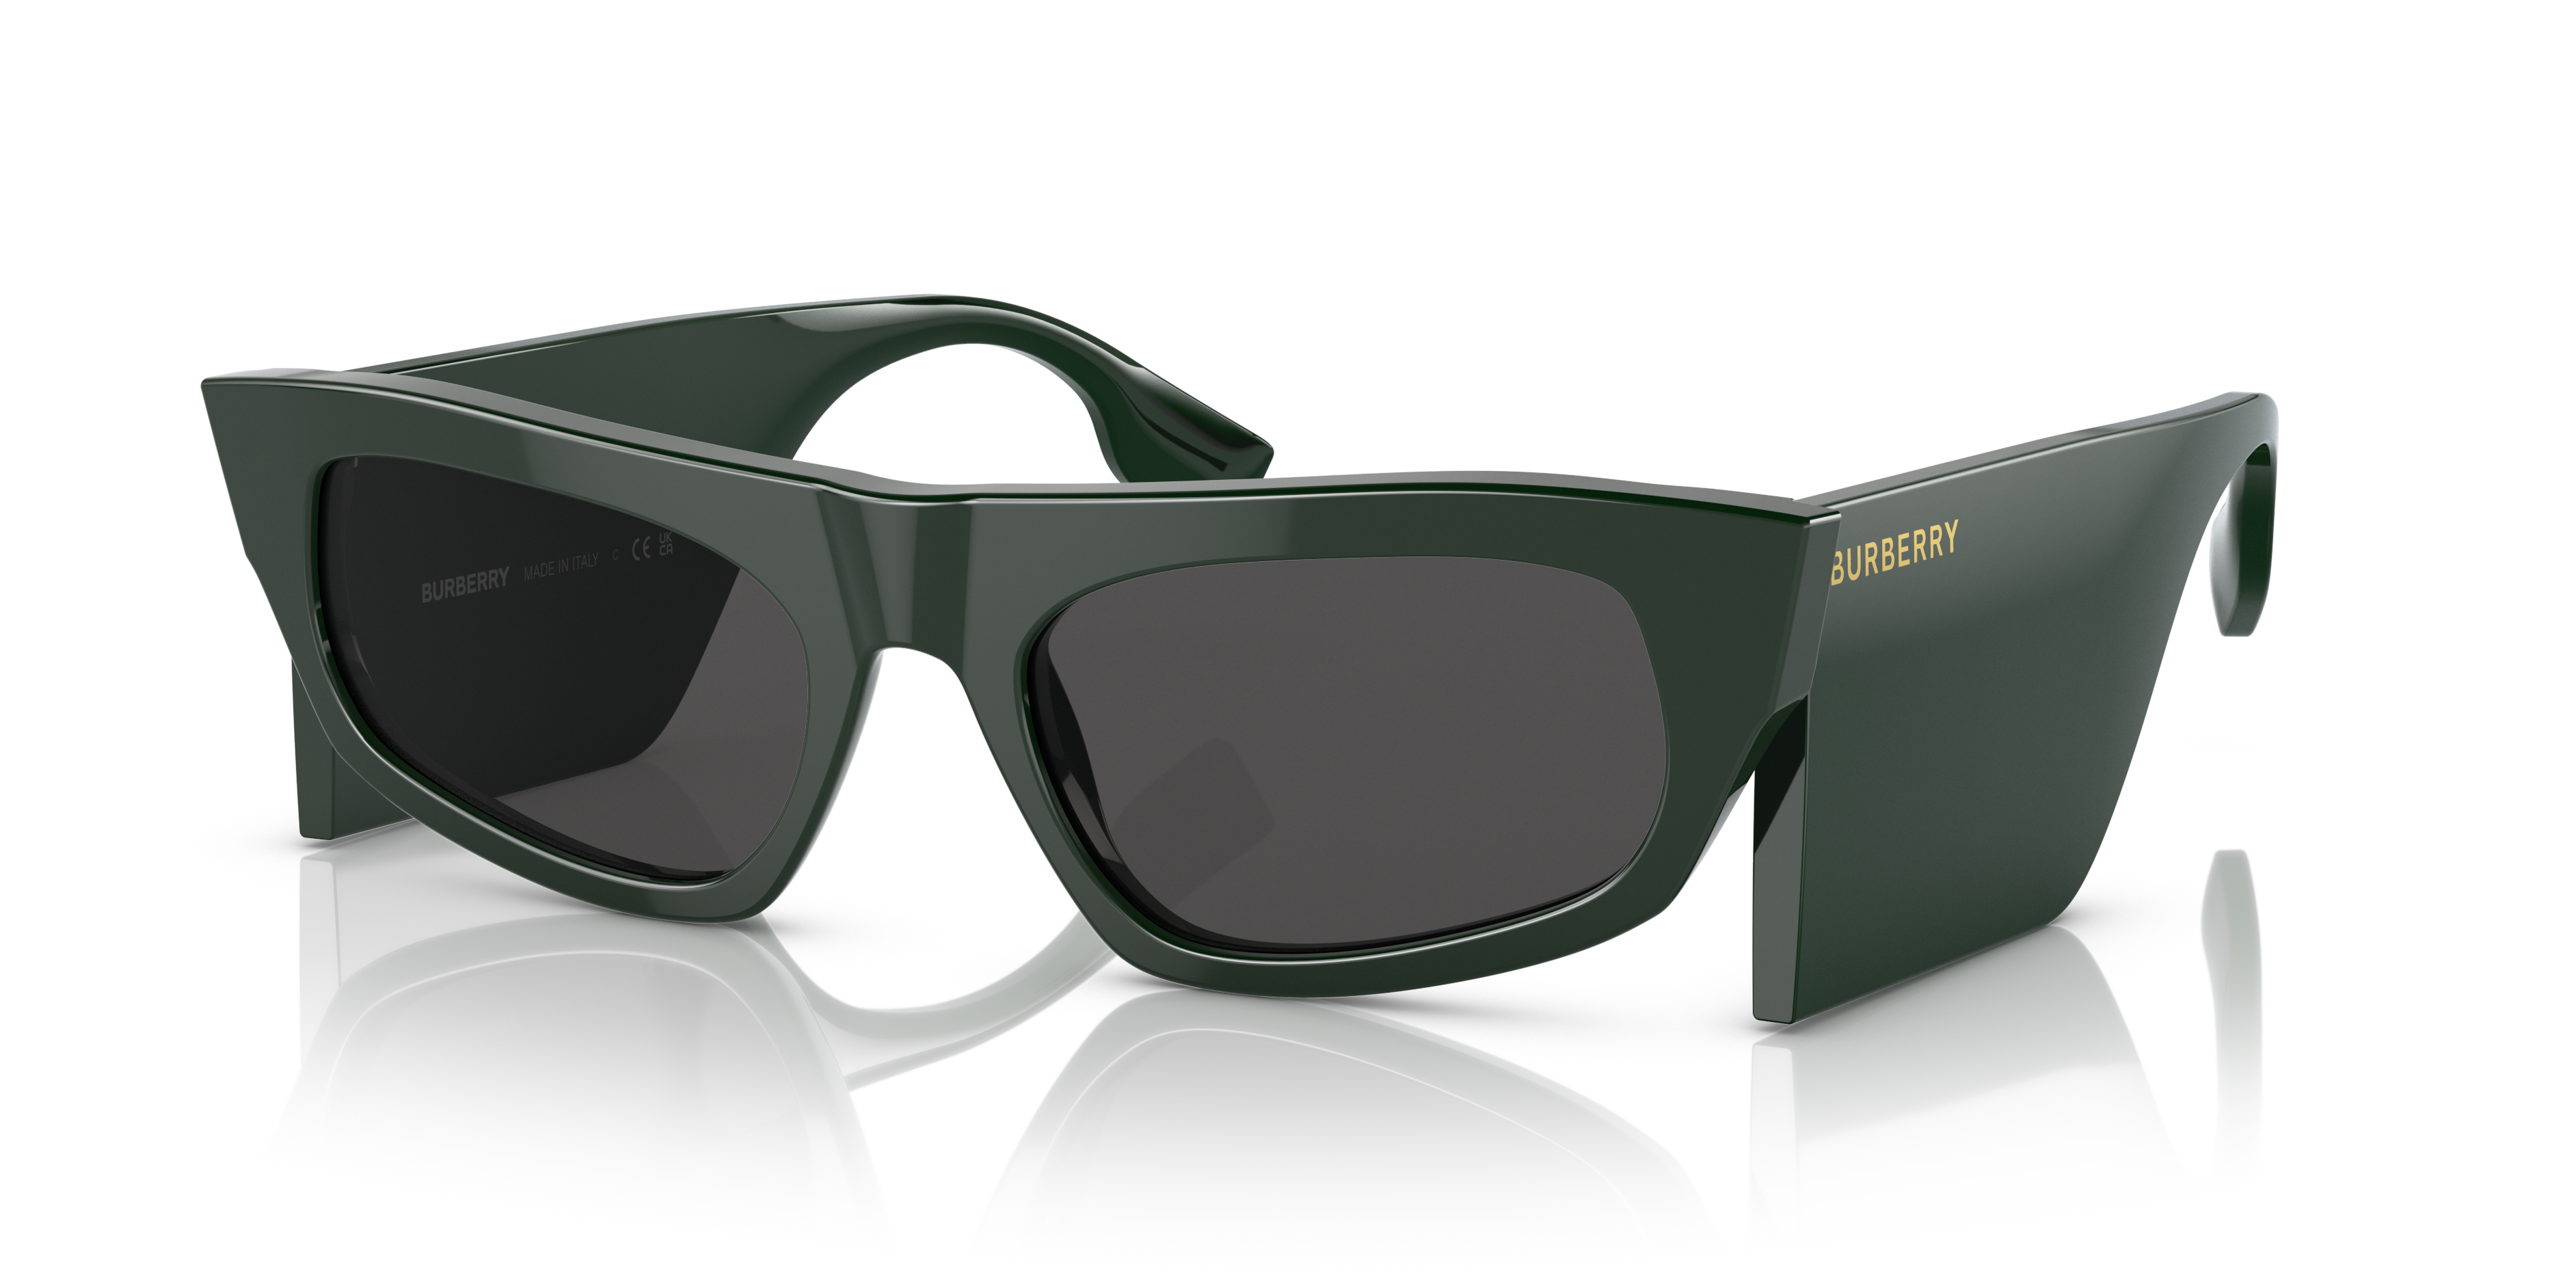 Aggregate more than 145 green burberry sunglasses